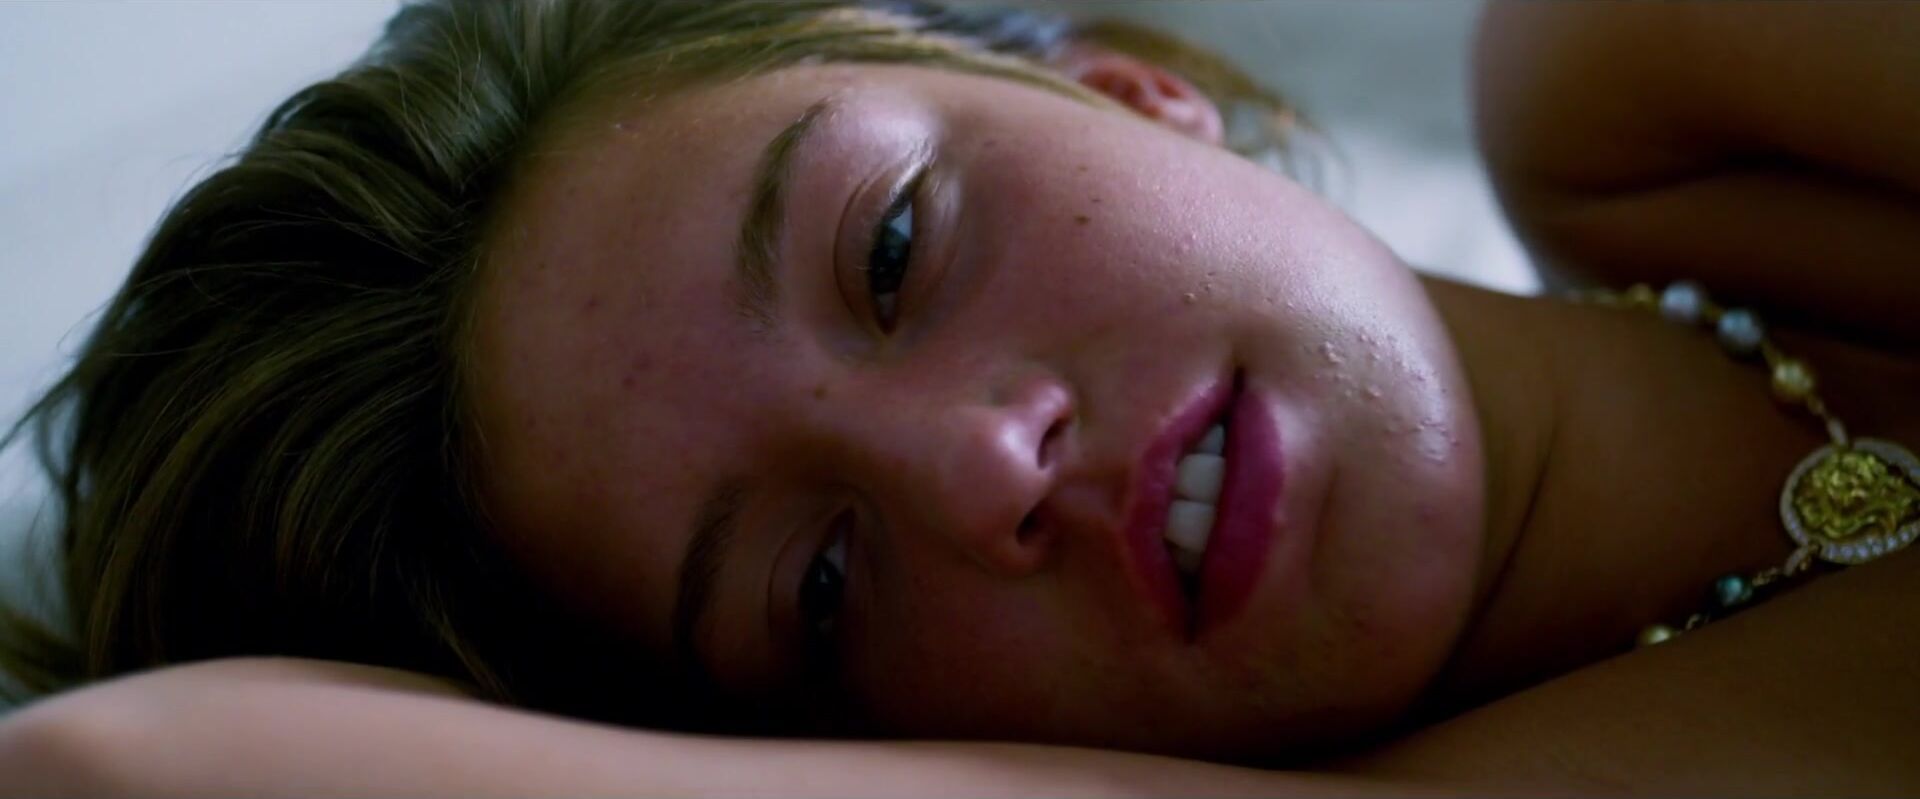 SpicyBigButt Adele Exarchopoulos and other French girls naked fool around in Orpheline (2016) Sucking Cock